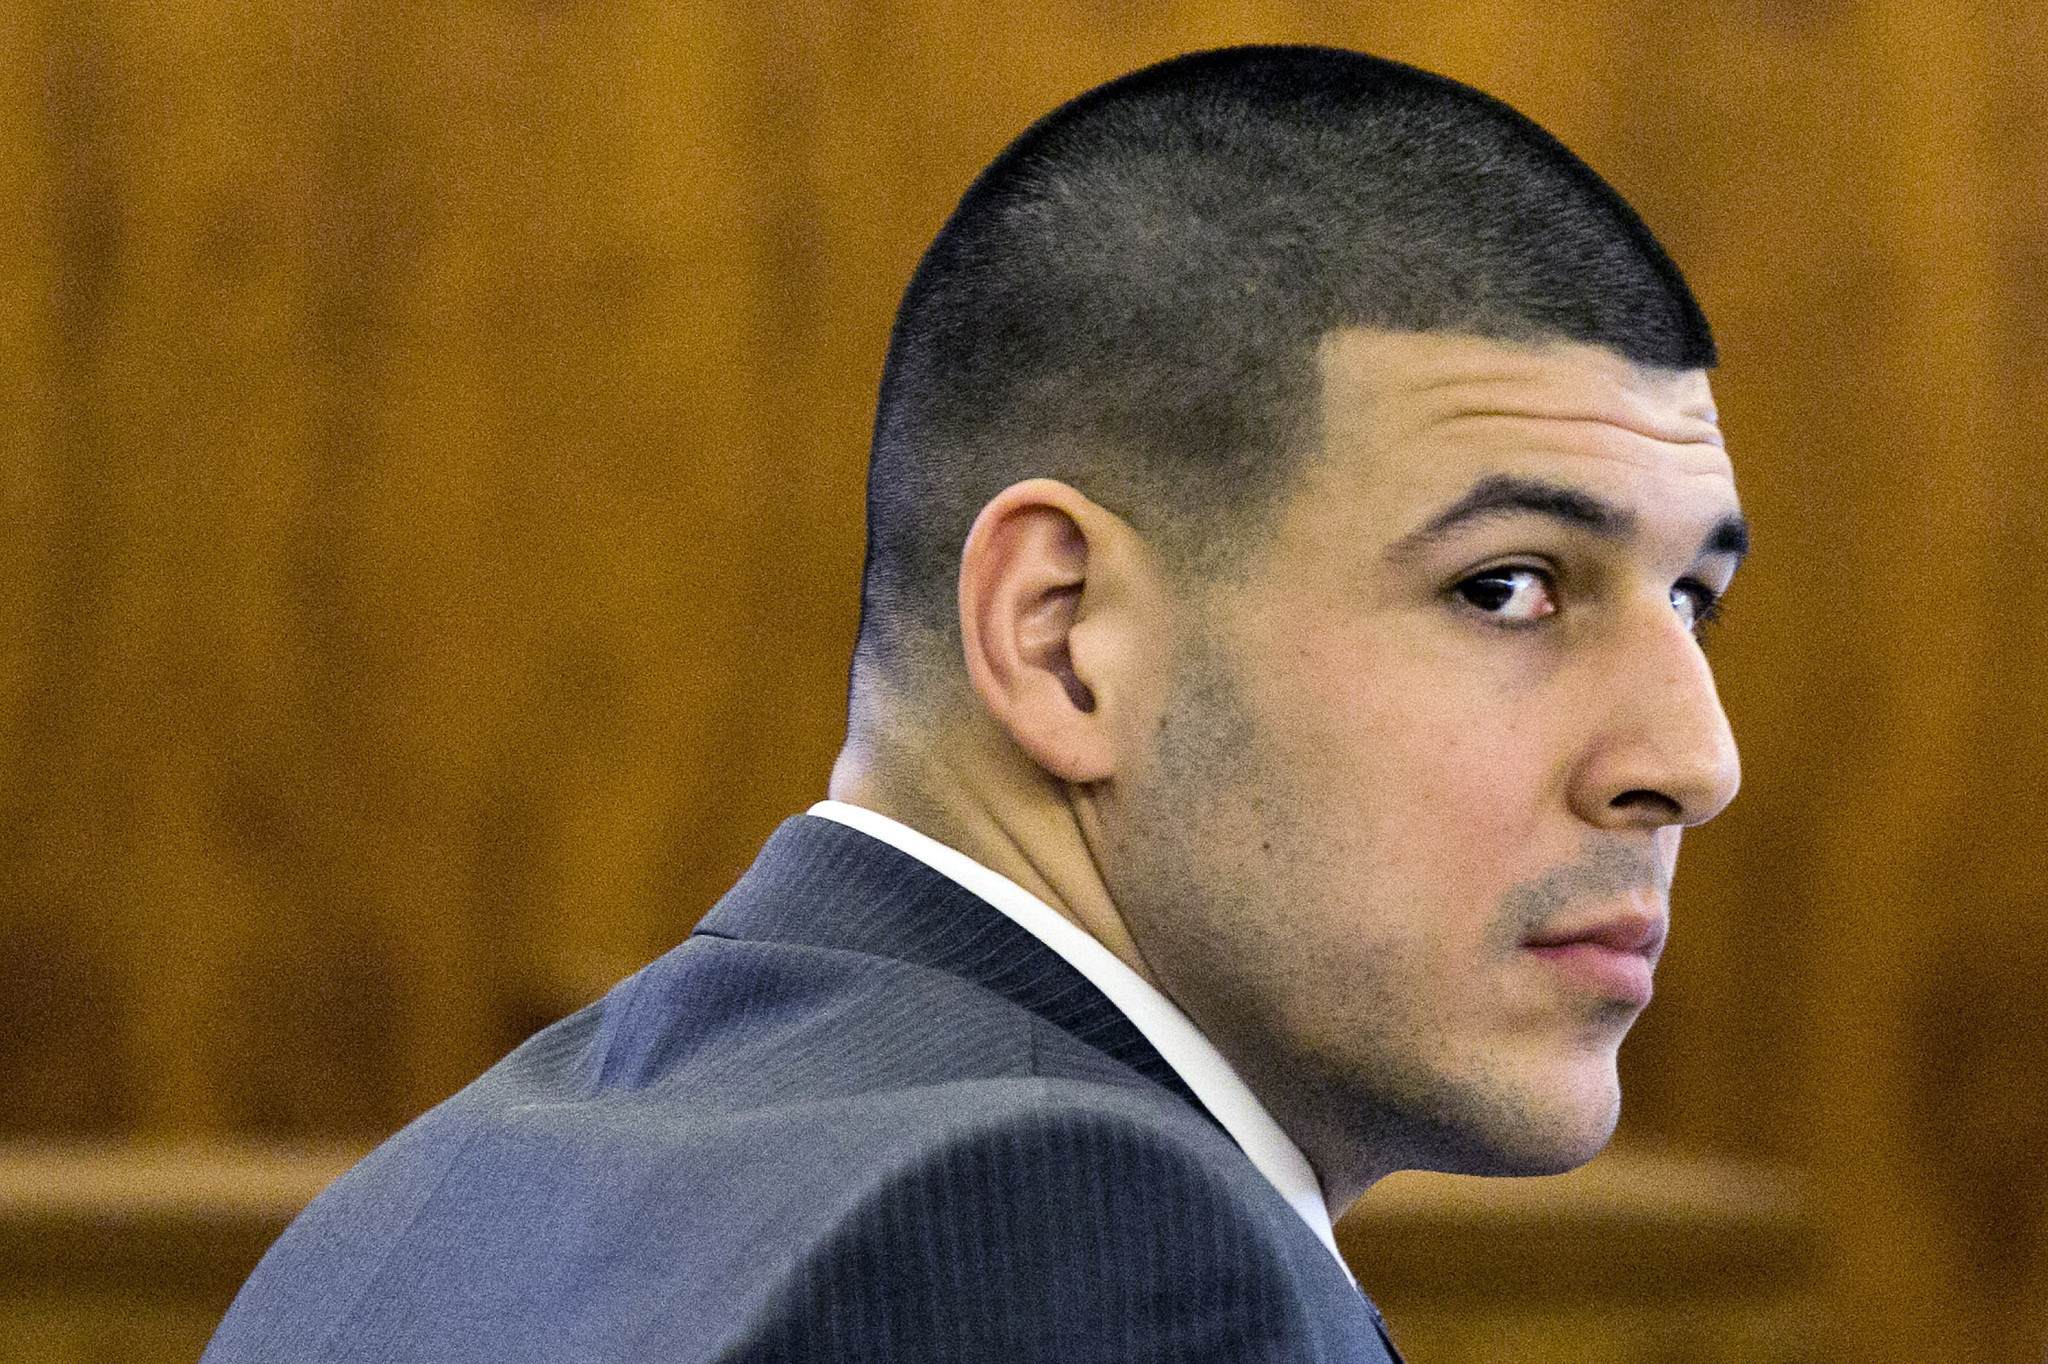 In Win For Aaron Hernandez, Judge Refuses To Allow Jurors To Hear